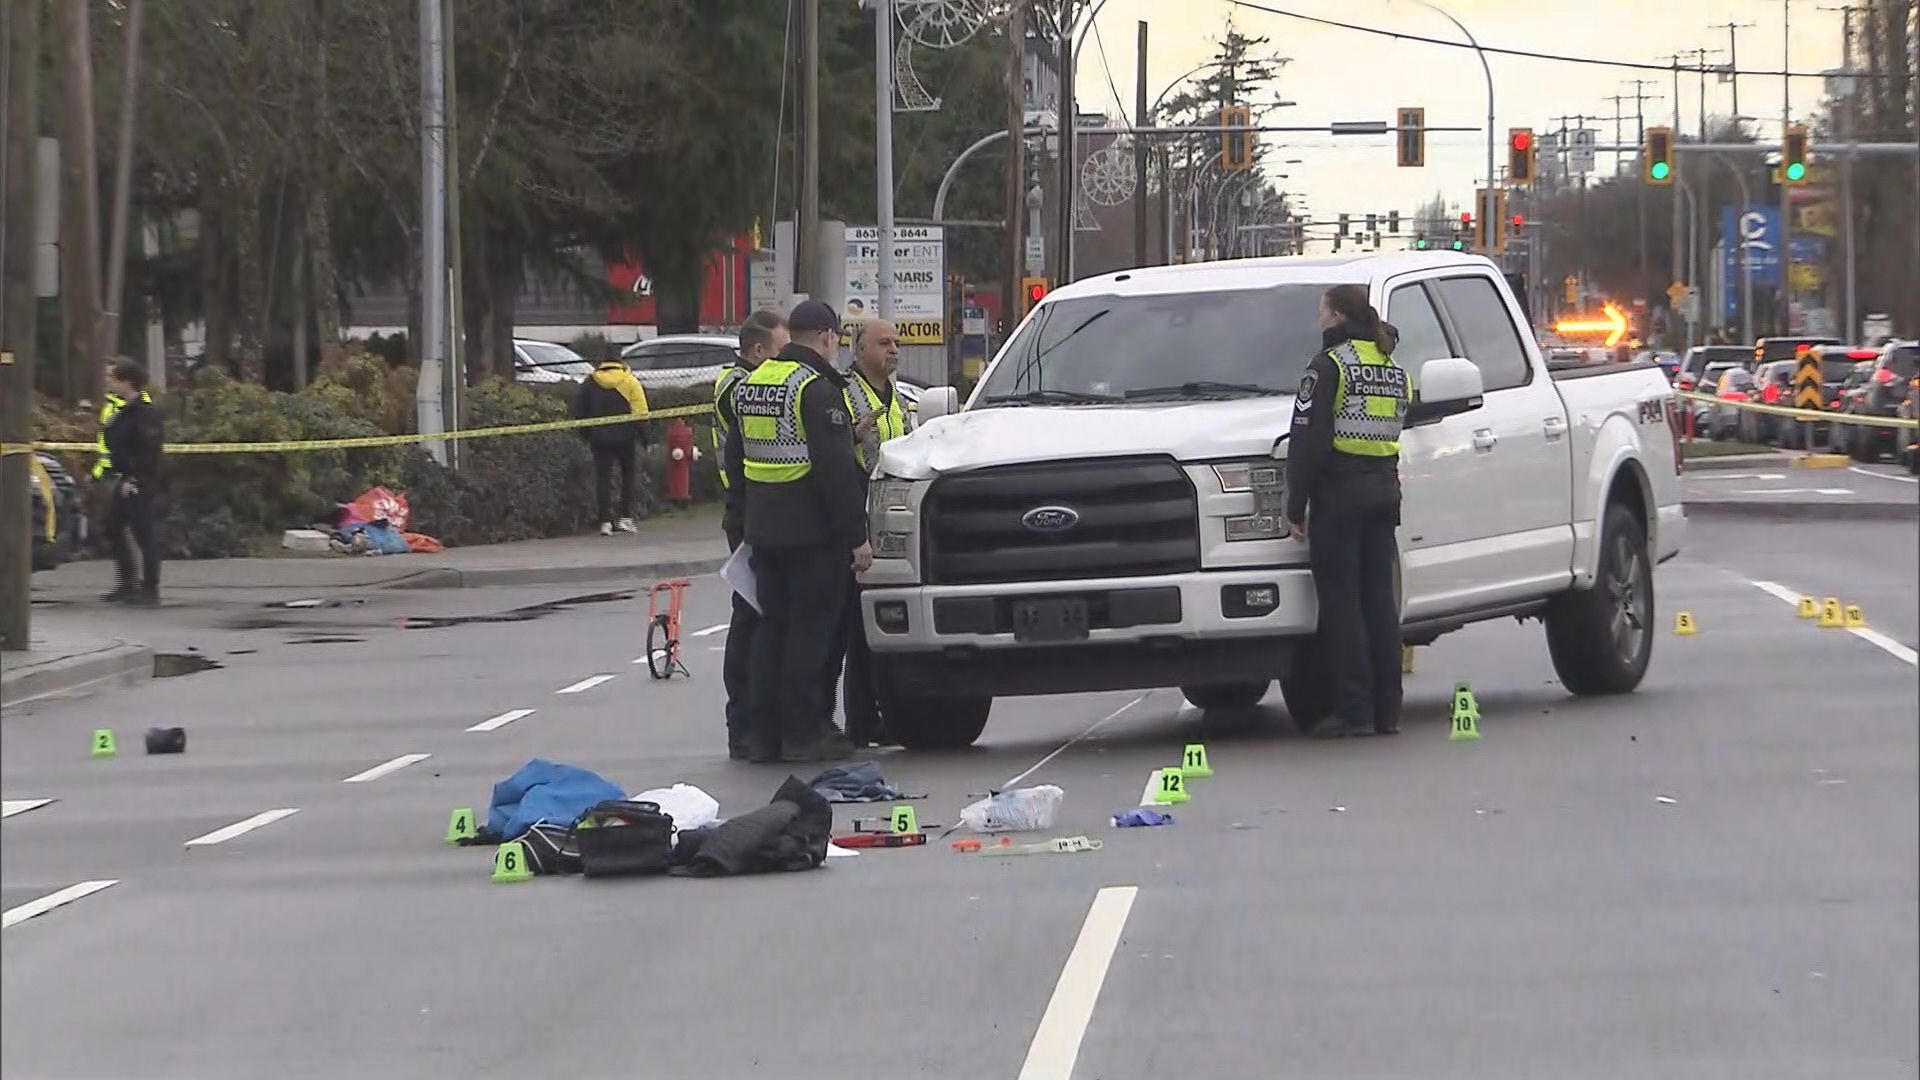 Another Pedestrian Struck In Surrey During Early Morning Traffic